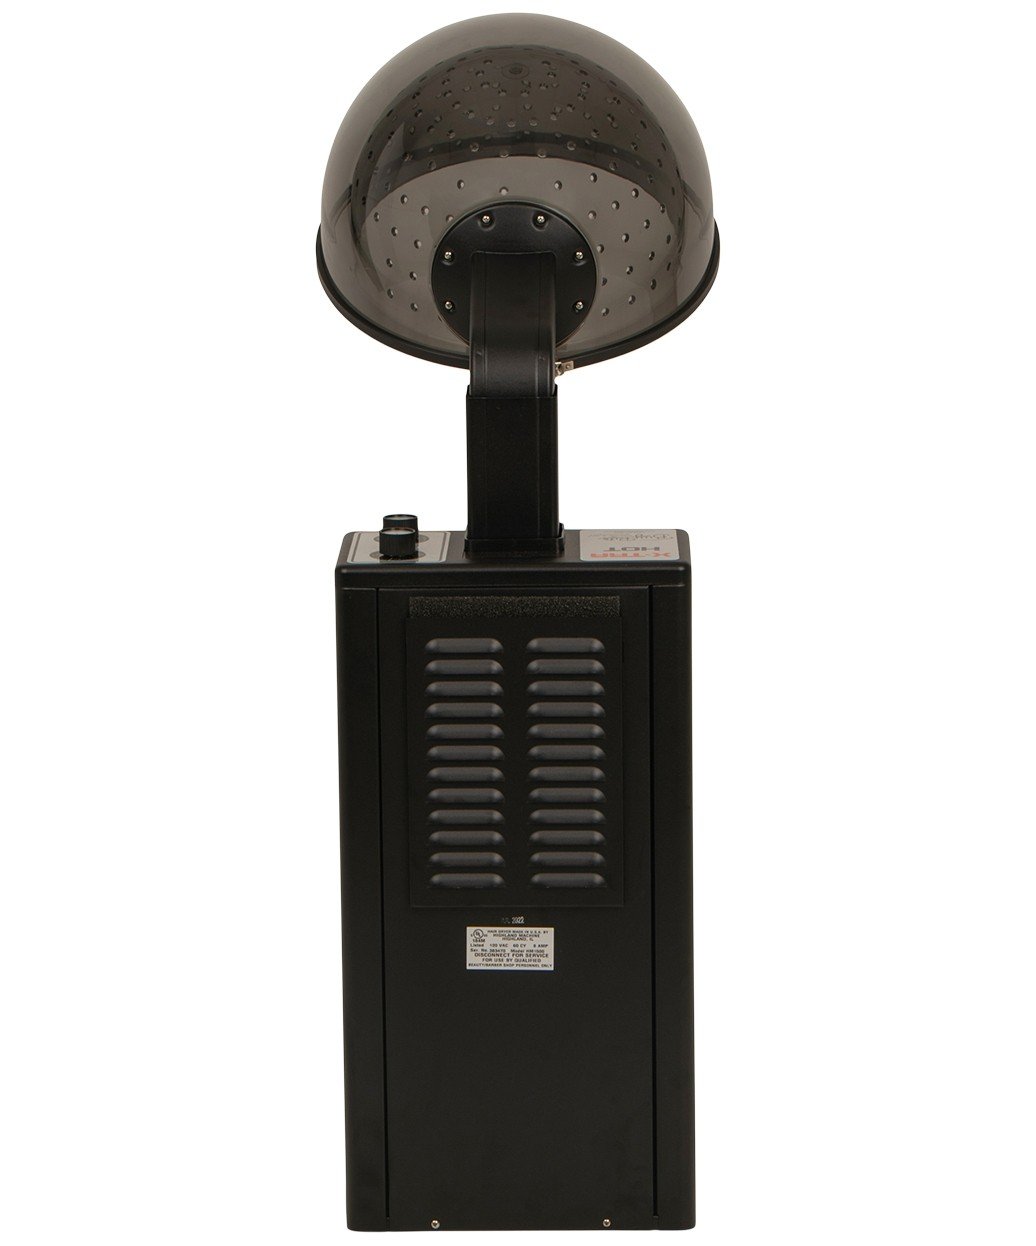 X-TRA Hot Ionic Conditioning Dryer